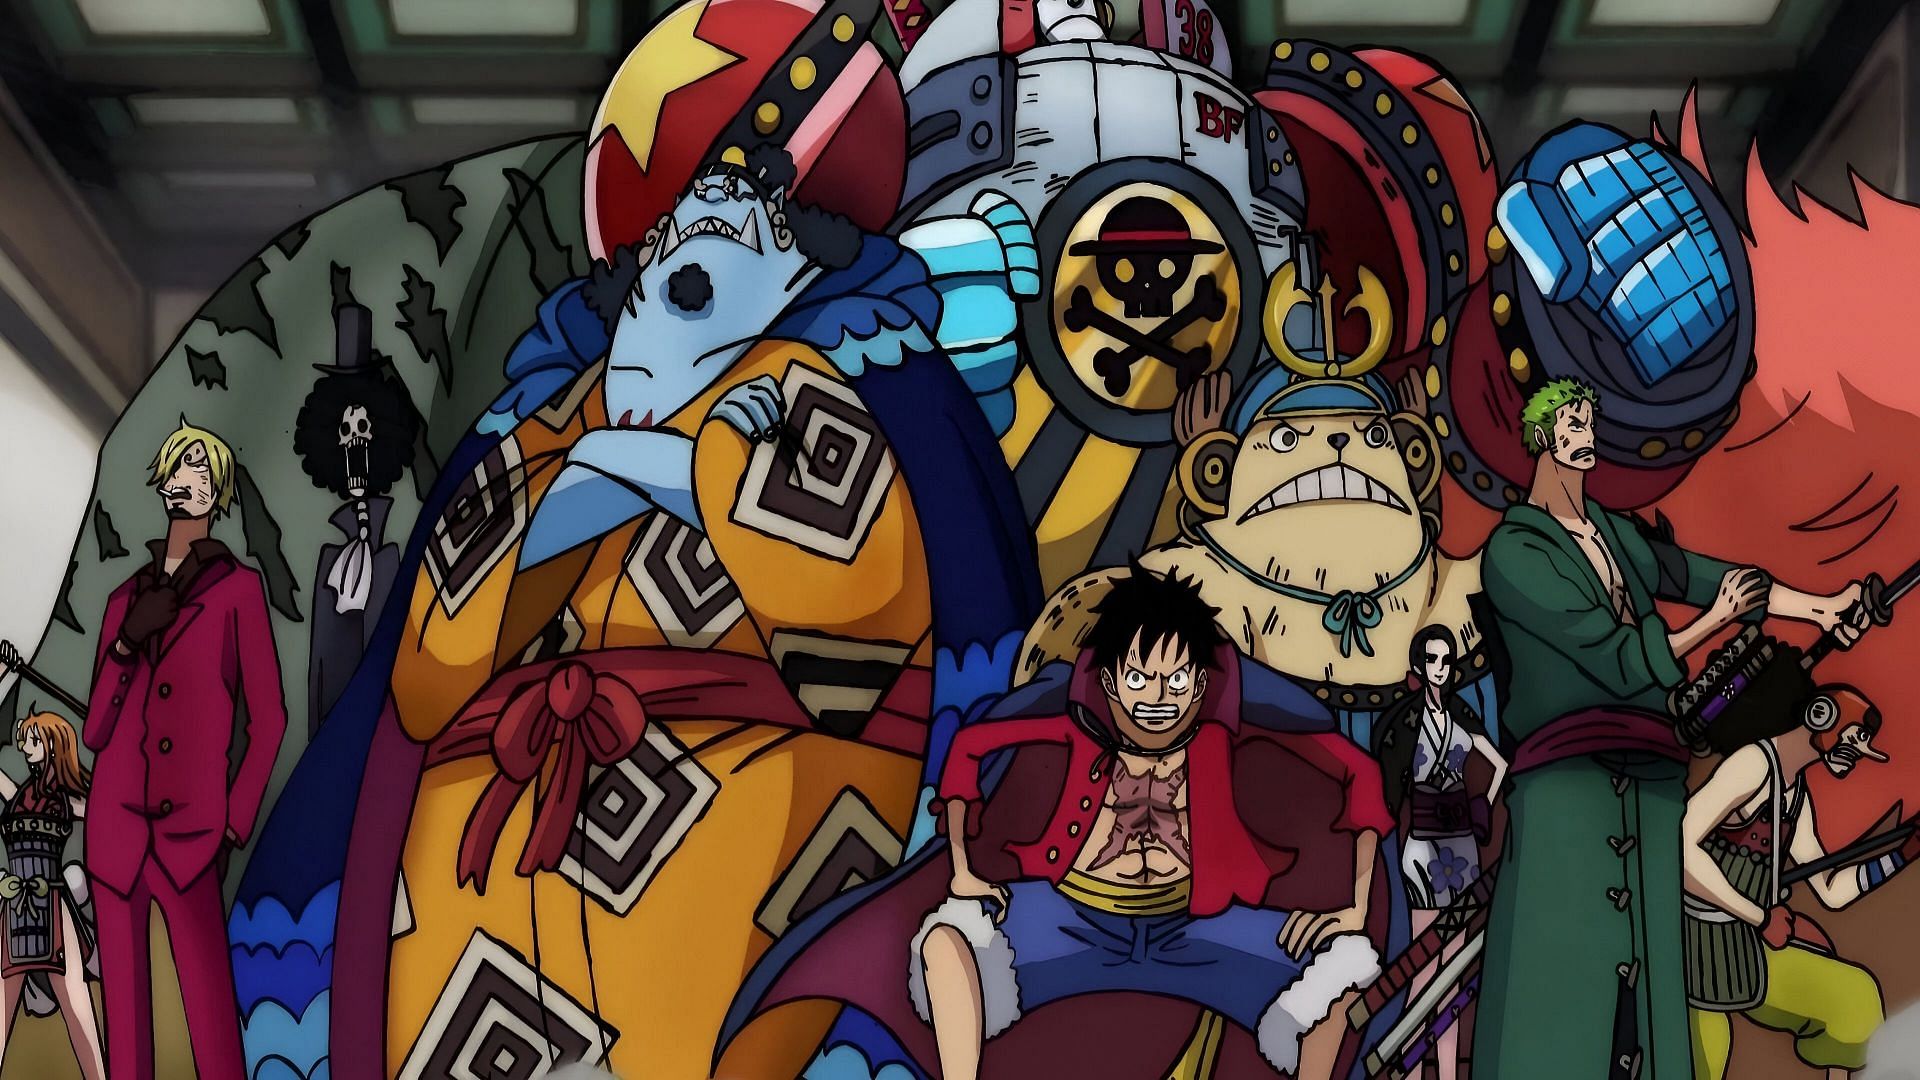 The Straw Hat Pirate crew as seen in the anime (Image via Toei Animation)